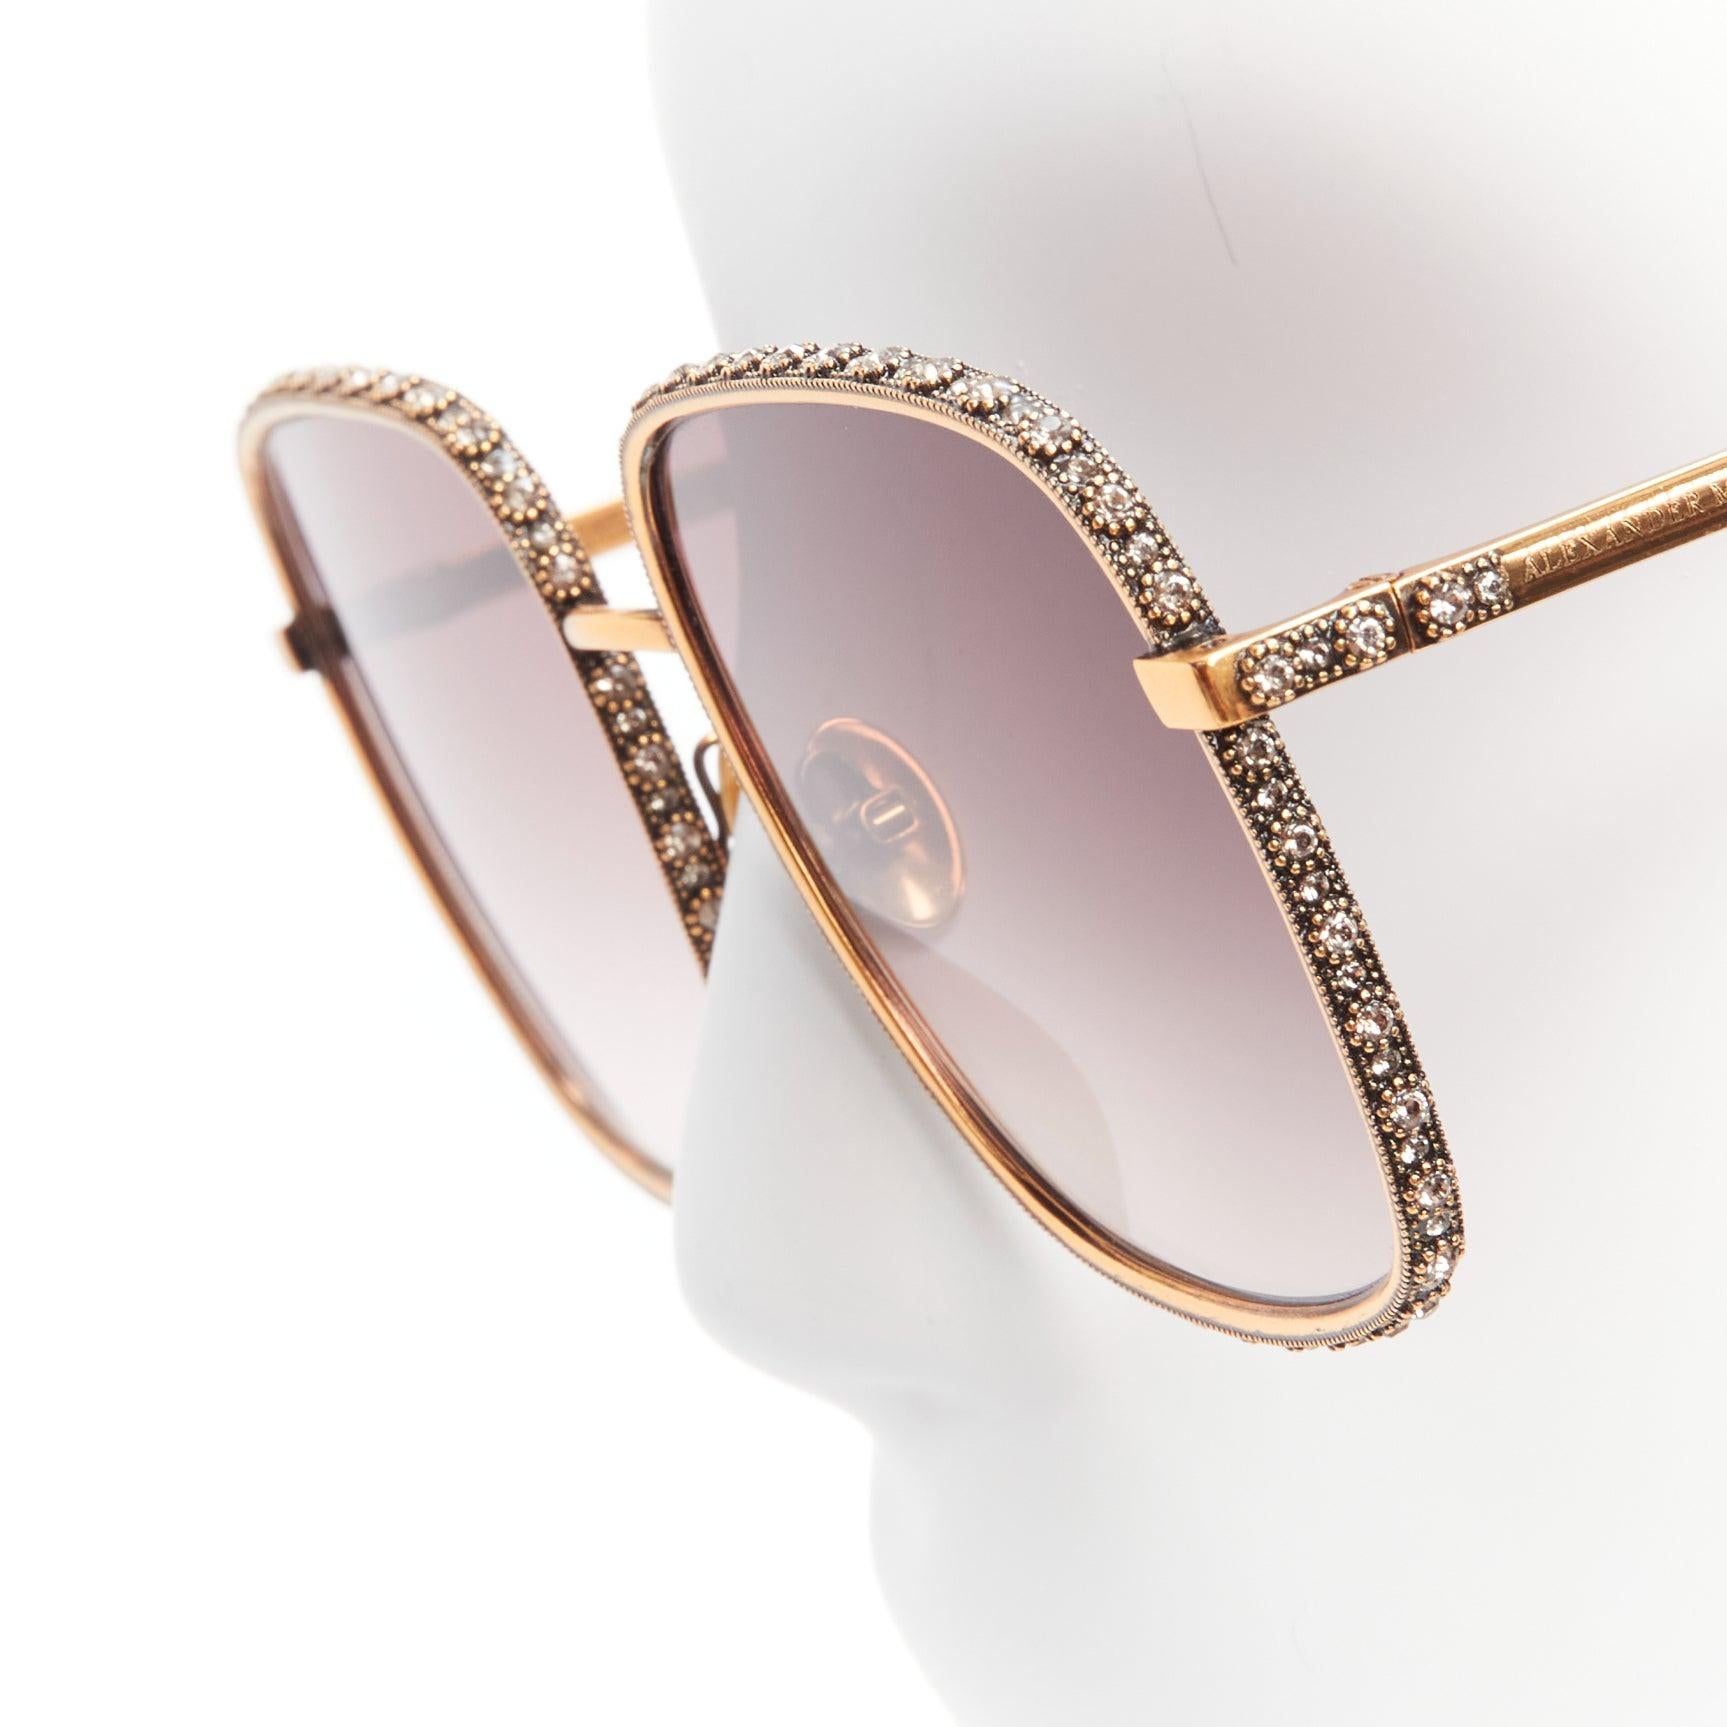 ALEXANDER MCQUEEN AM0180B crystal antique barocco square ombre sunglasses Lady Gaga
Reference: KEDG/A00254
Brand: Alexander McQueen
As seen on: Lady Gaga
Material: Metal, Plastic
Color: Red, Gold
Pattern: Barocco
Extra Details: Crystal details